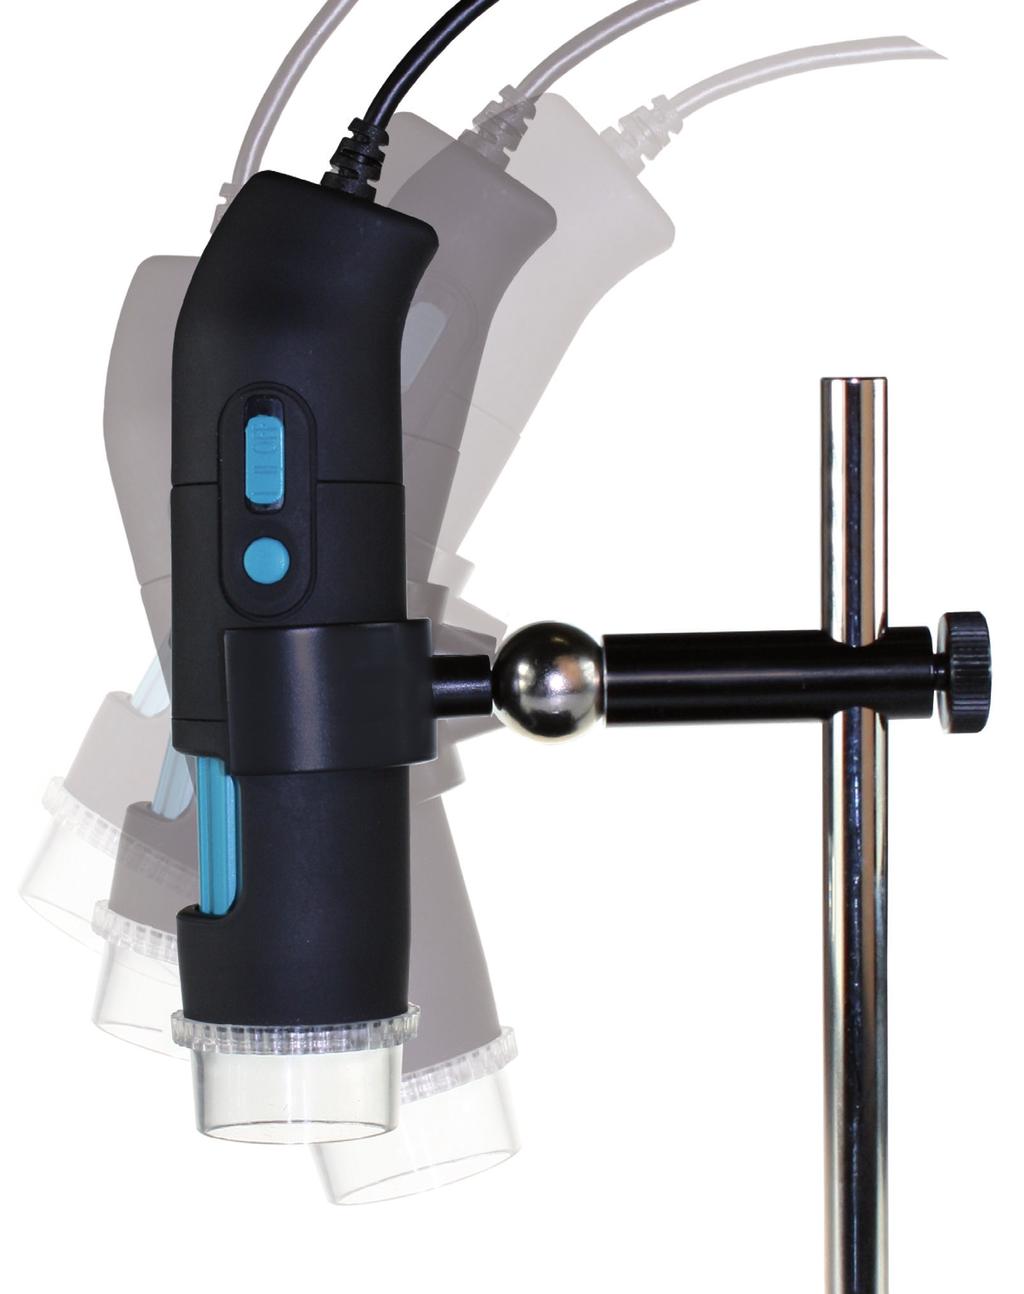 cable guiding clamp, user manual Stand, holder, user manual A unique feature optional of the Q-scope stands range is